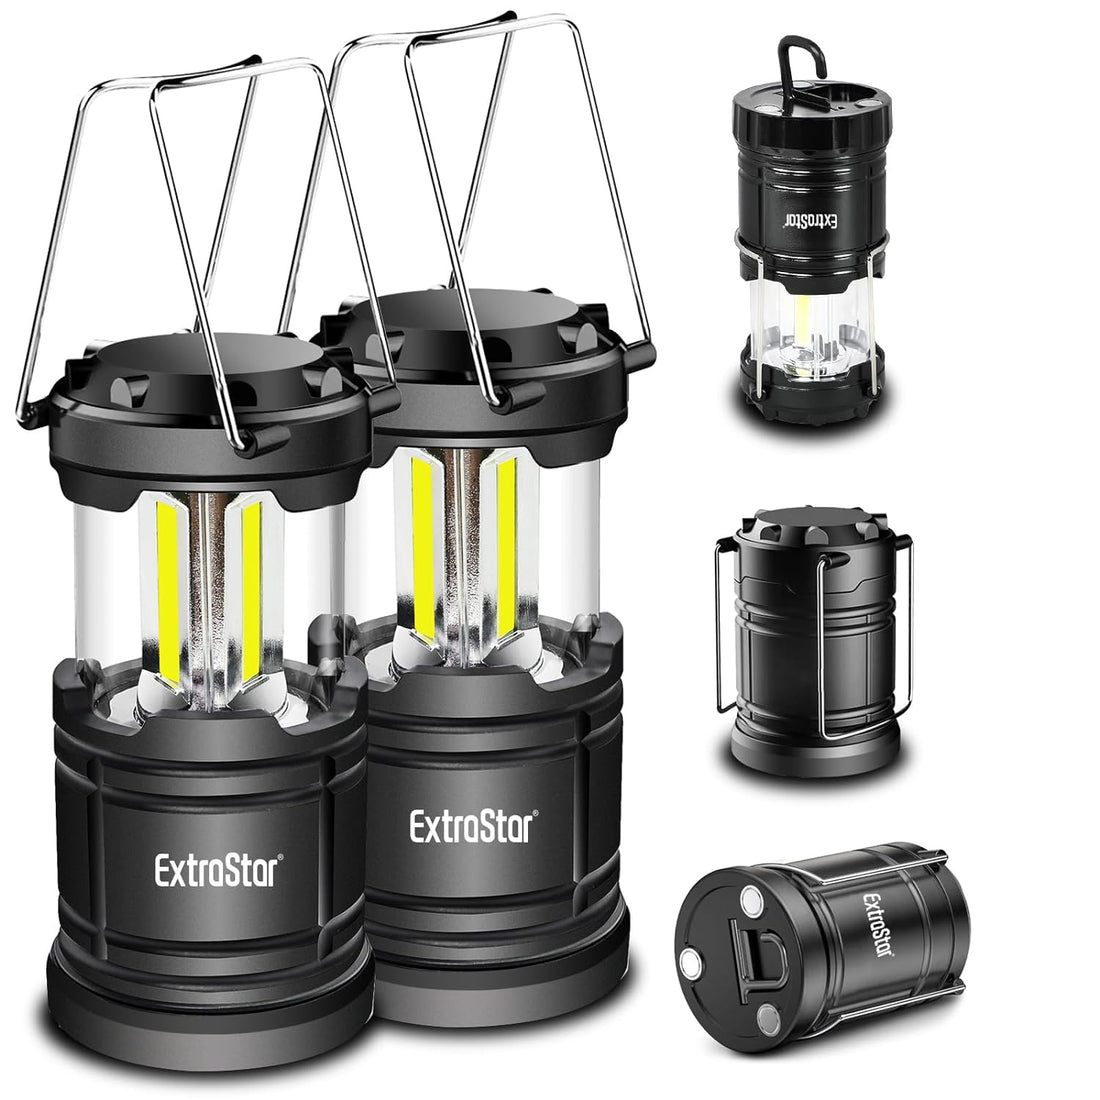 EXTRASTAR 2 Pack LED Camping Lantern, Water Resistant Outdoor Collapsible Lantern, Battery Operated Lights, Magnetic Base and Foldable Hook Lantern Battery Powered LED for Power Outages